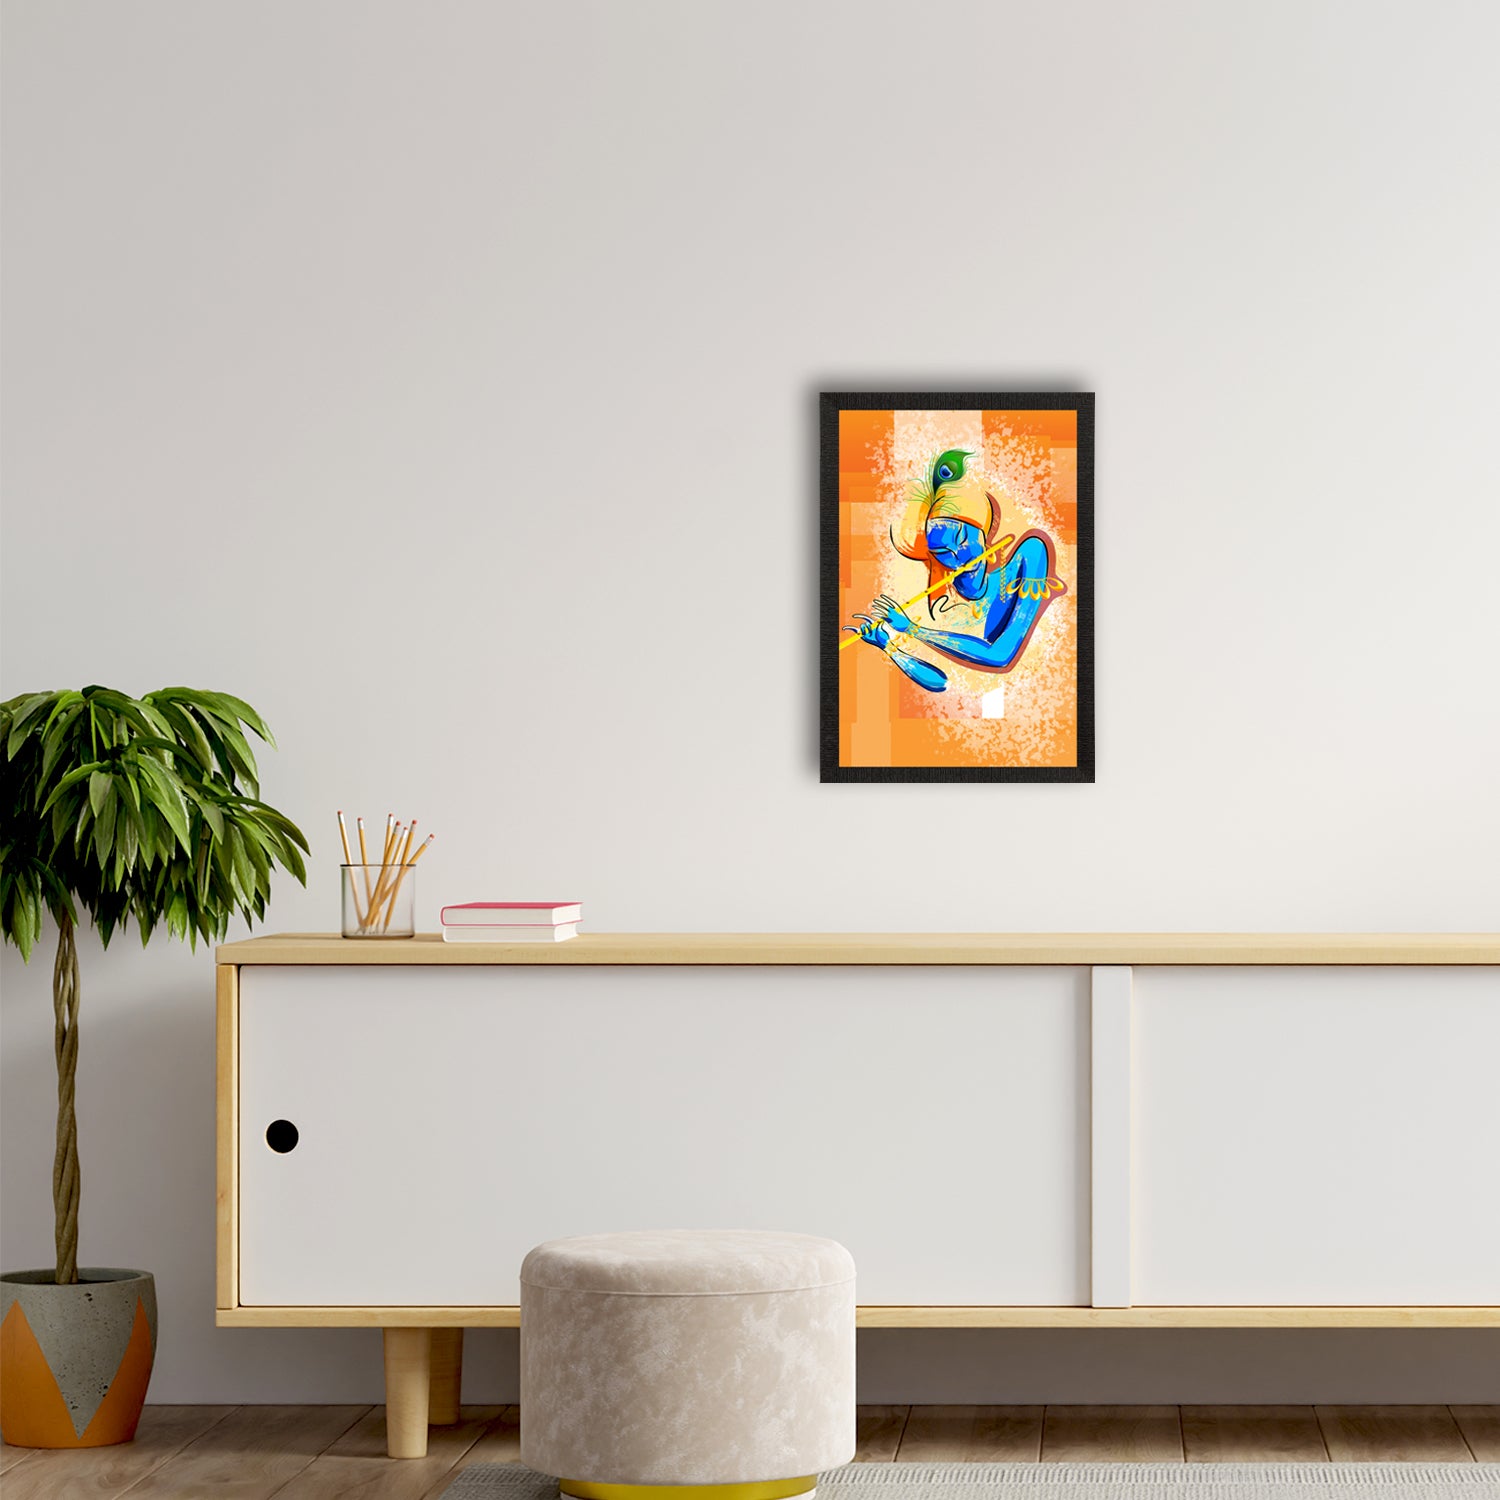 Lord Krishna Playing Flute Painting Digital Printed Religious Wall Art 2